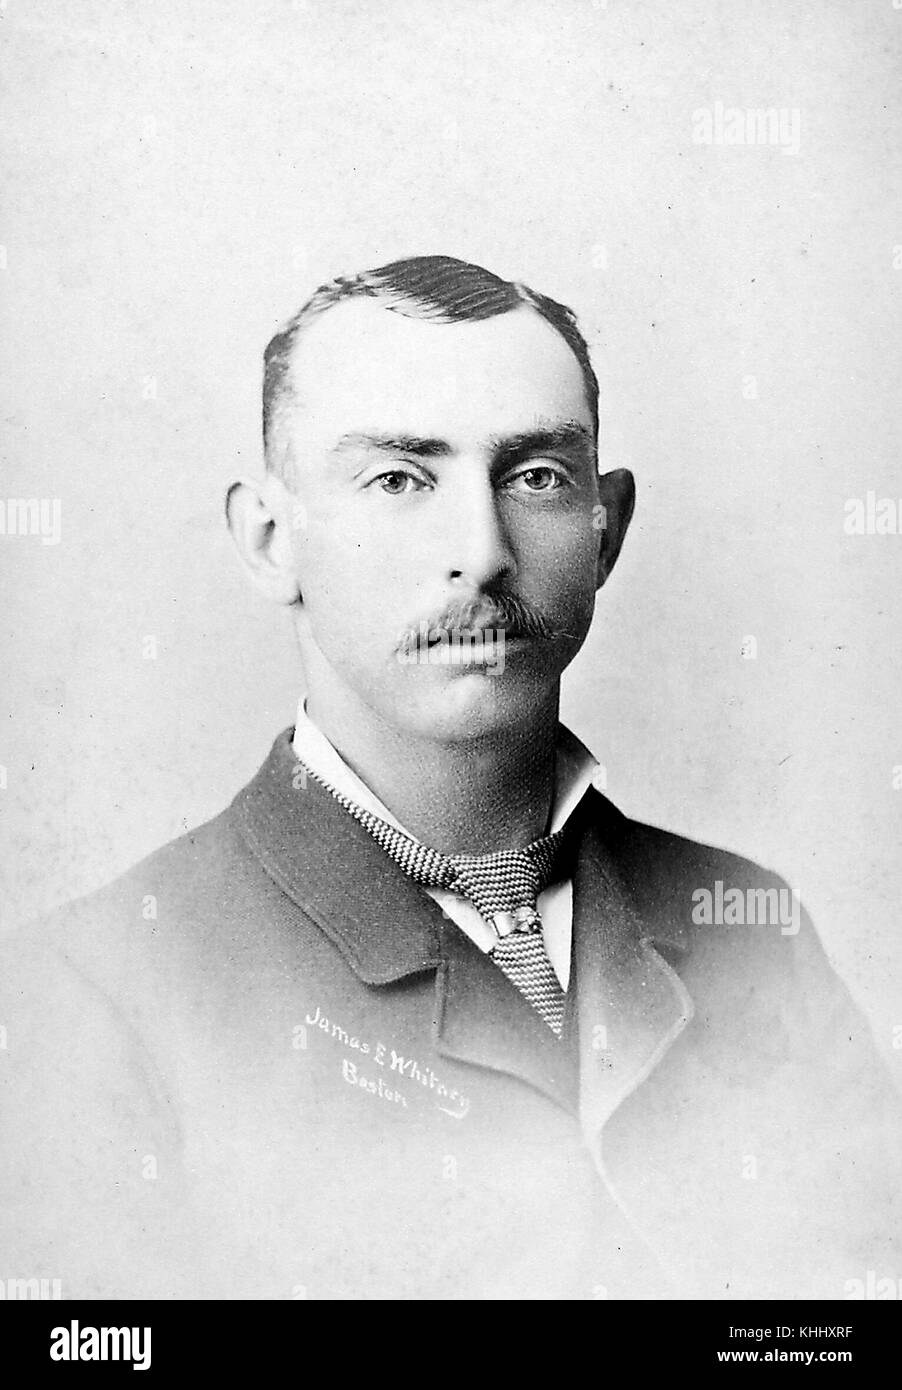 Half length portrait of Jim Whitney, right-handed pitcher over parts of ten seasons (18811890) with the Boston Red Caps/Beaneaters, Kansas City Cowboys, Washington Nationals, Indianapolis Hoosiers and Philadelphia Athletics, National League strikeout champion in 1883 with the Boston Beaneaters, wearing a suit and tie, photograph by CC Randall, Detroit, Michigan, 1900. From the New York Public Library. Stock Photo